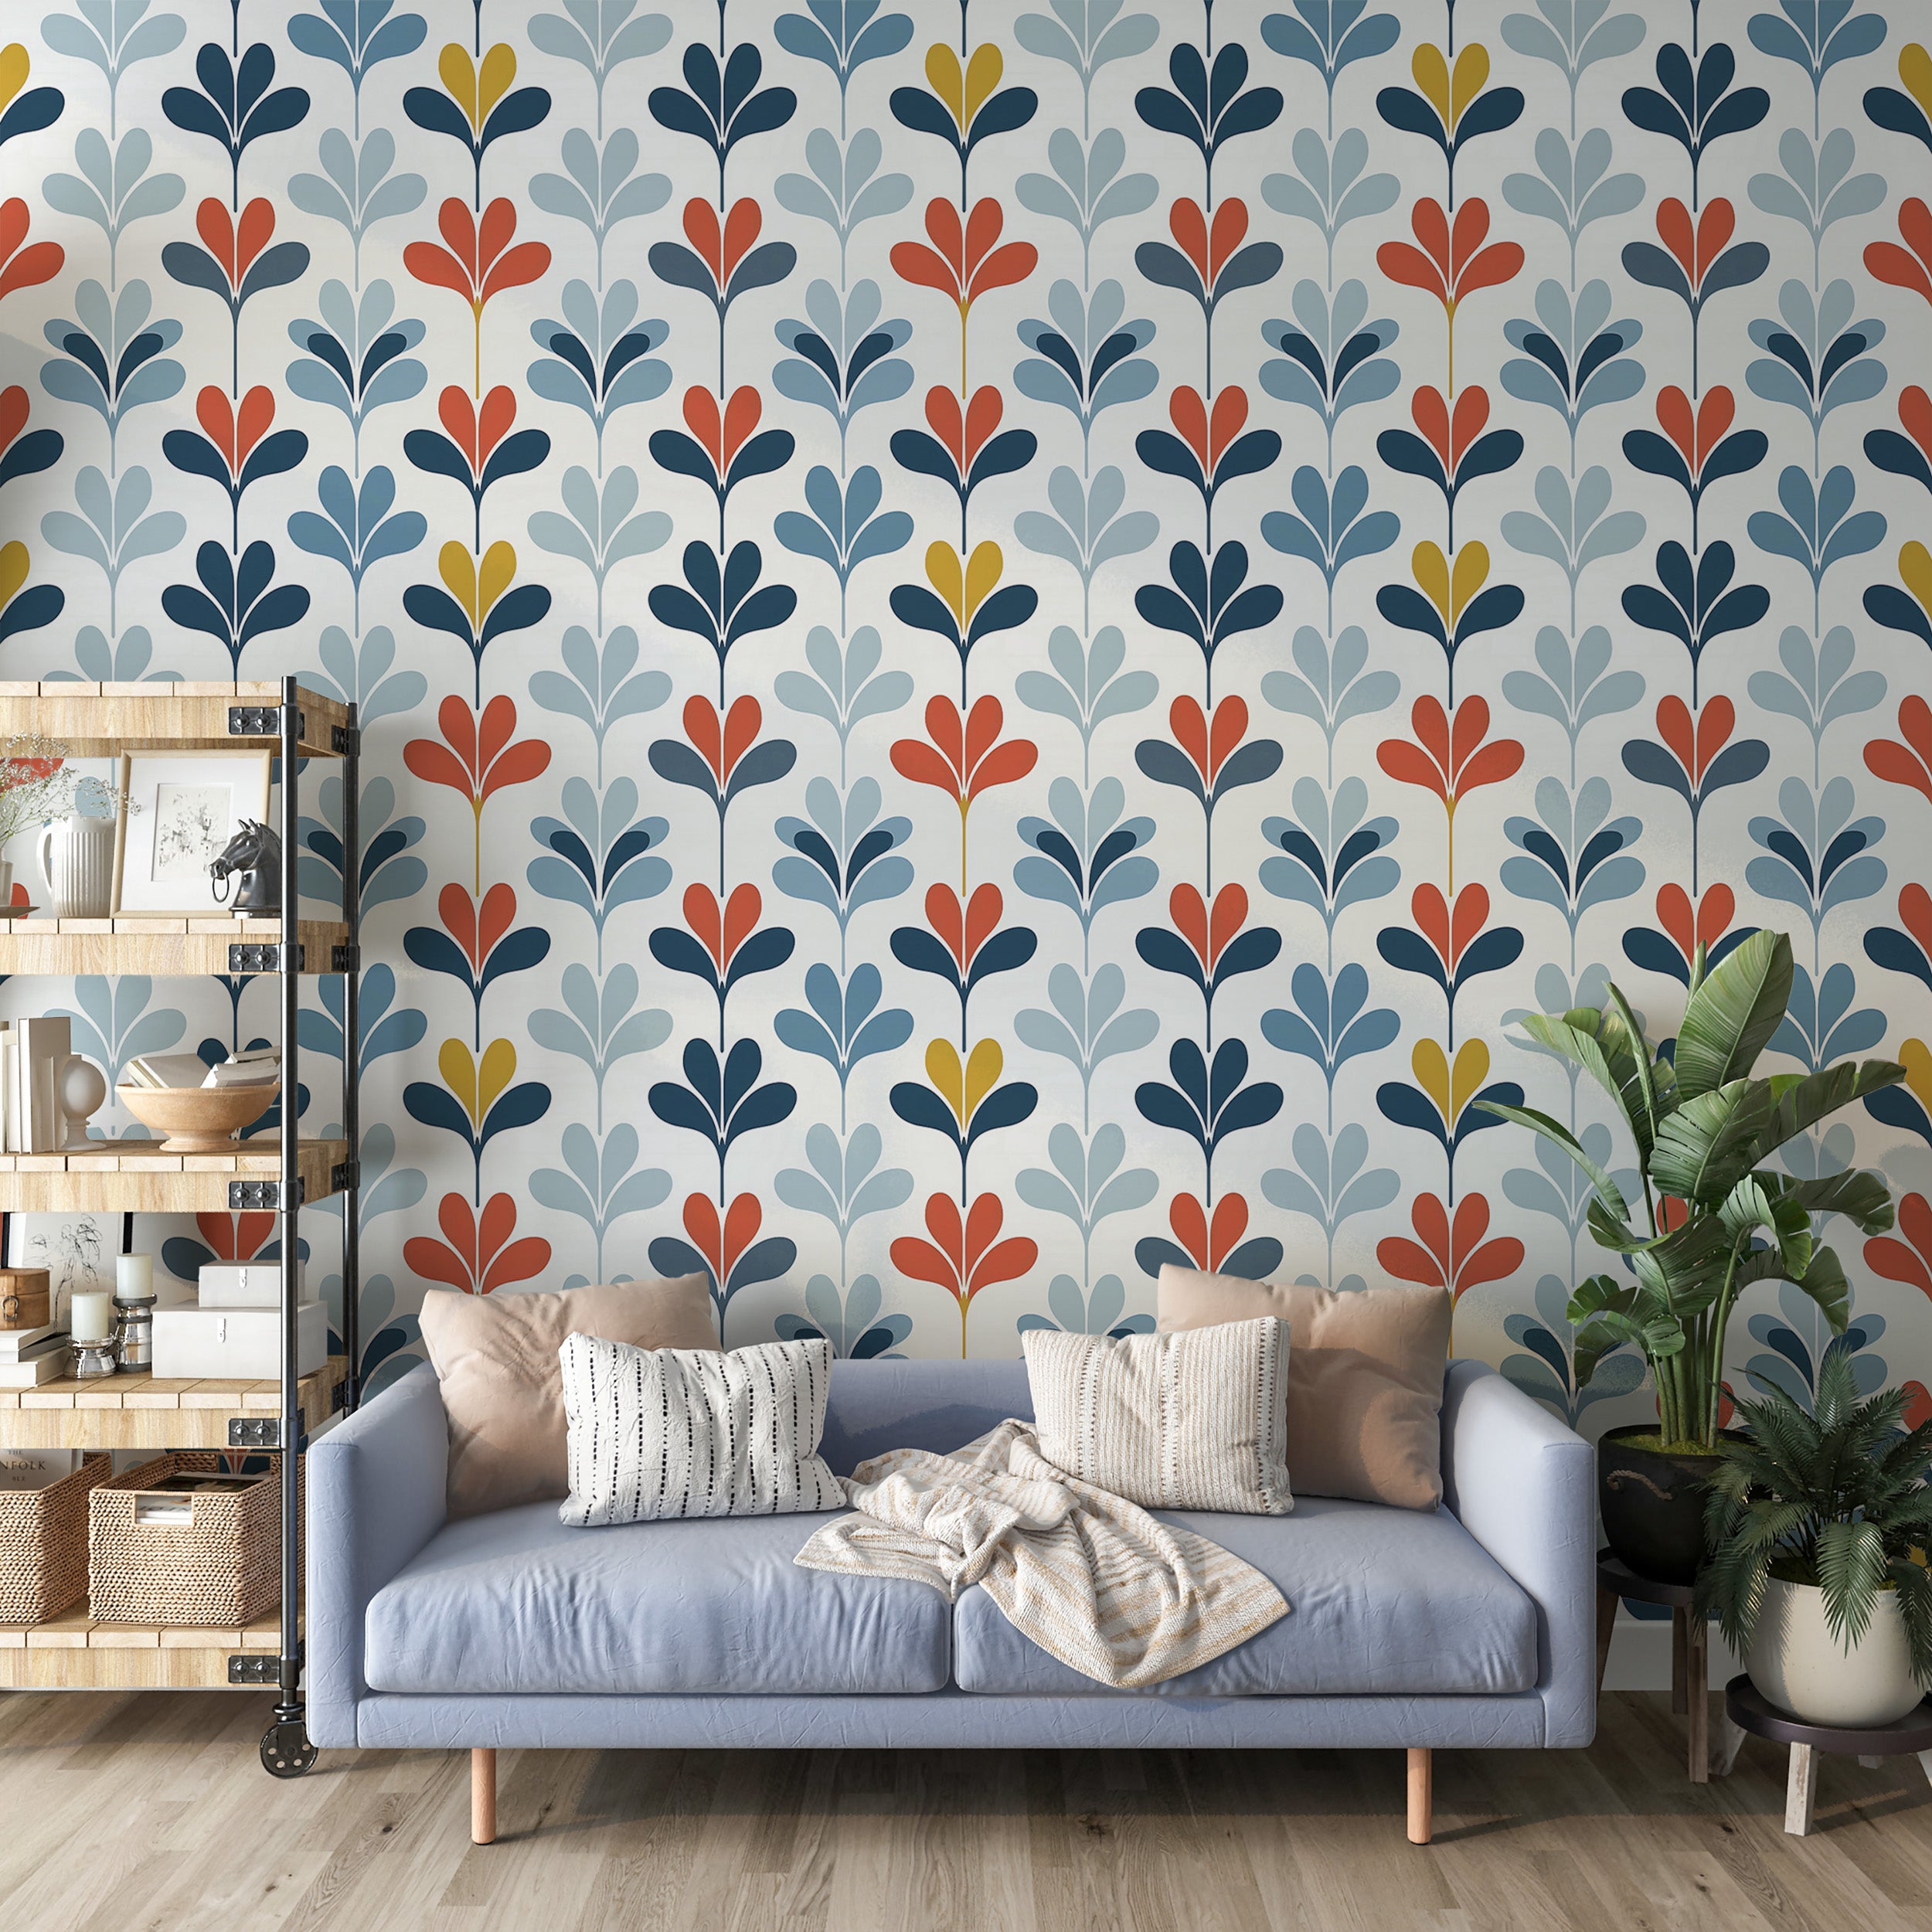 Effortless Application of Colorful Leaves Wallpaper